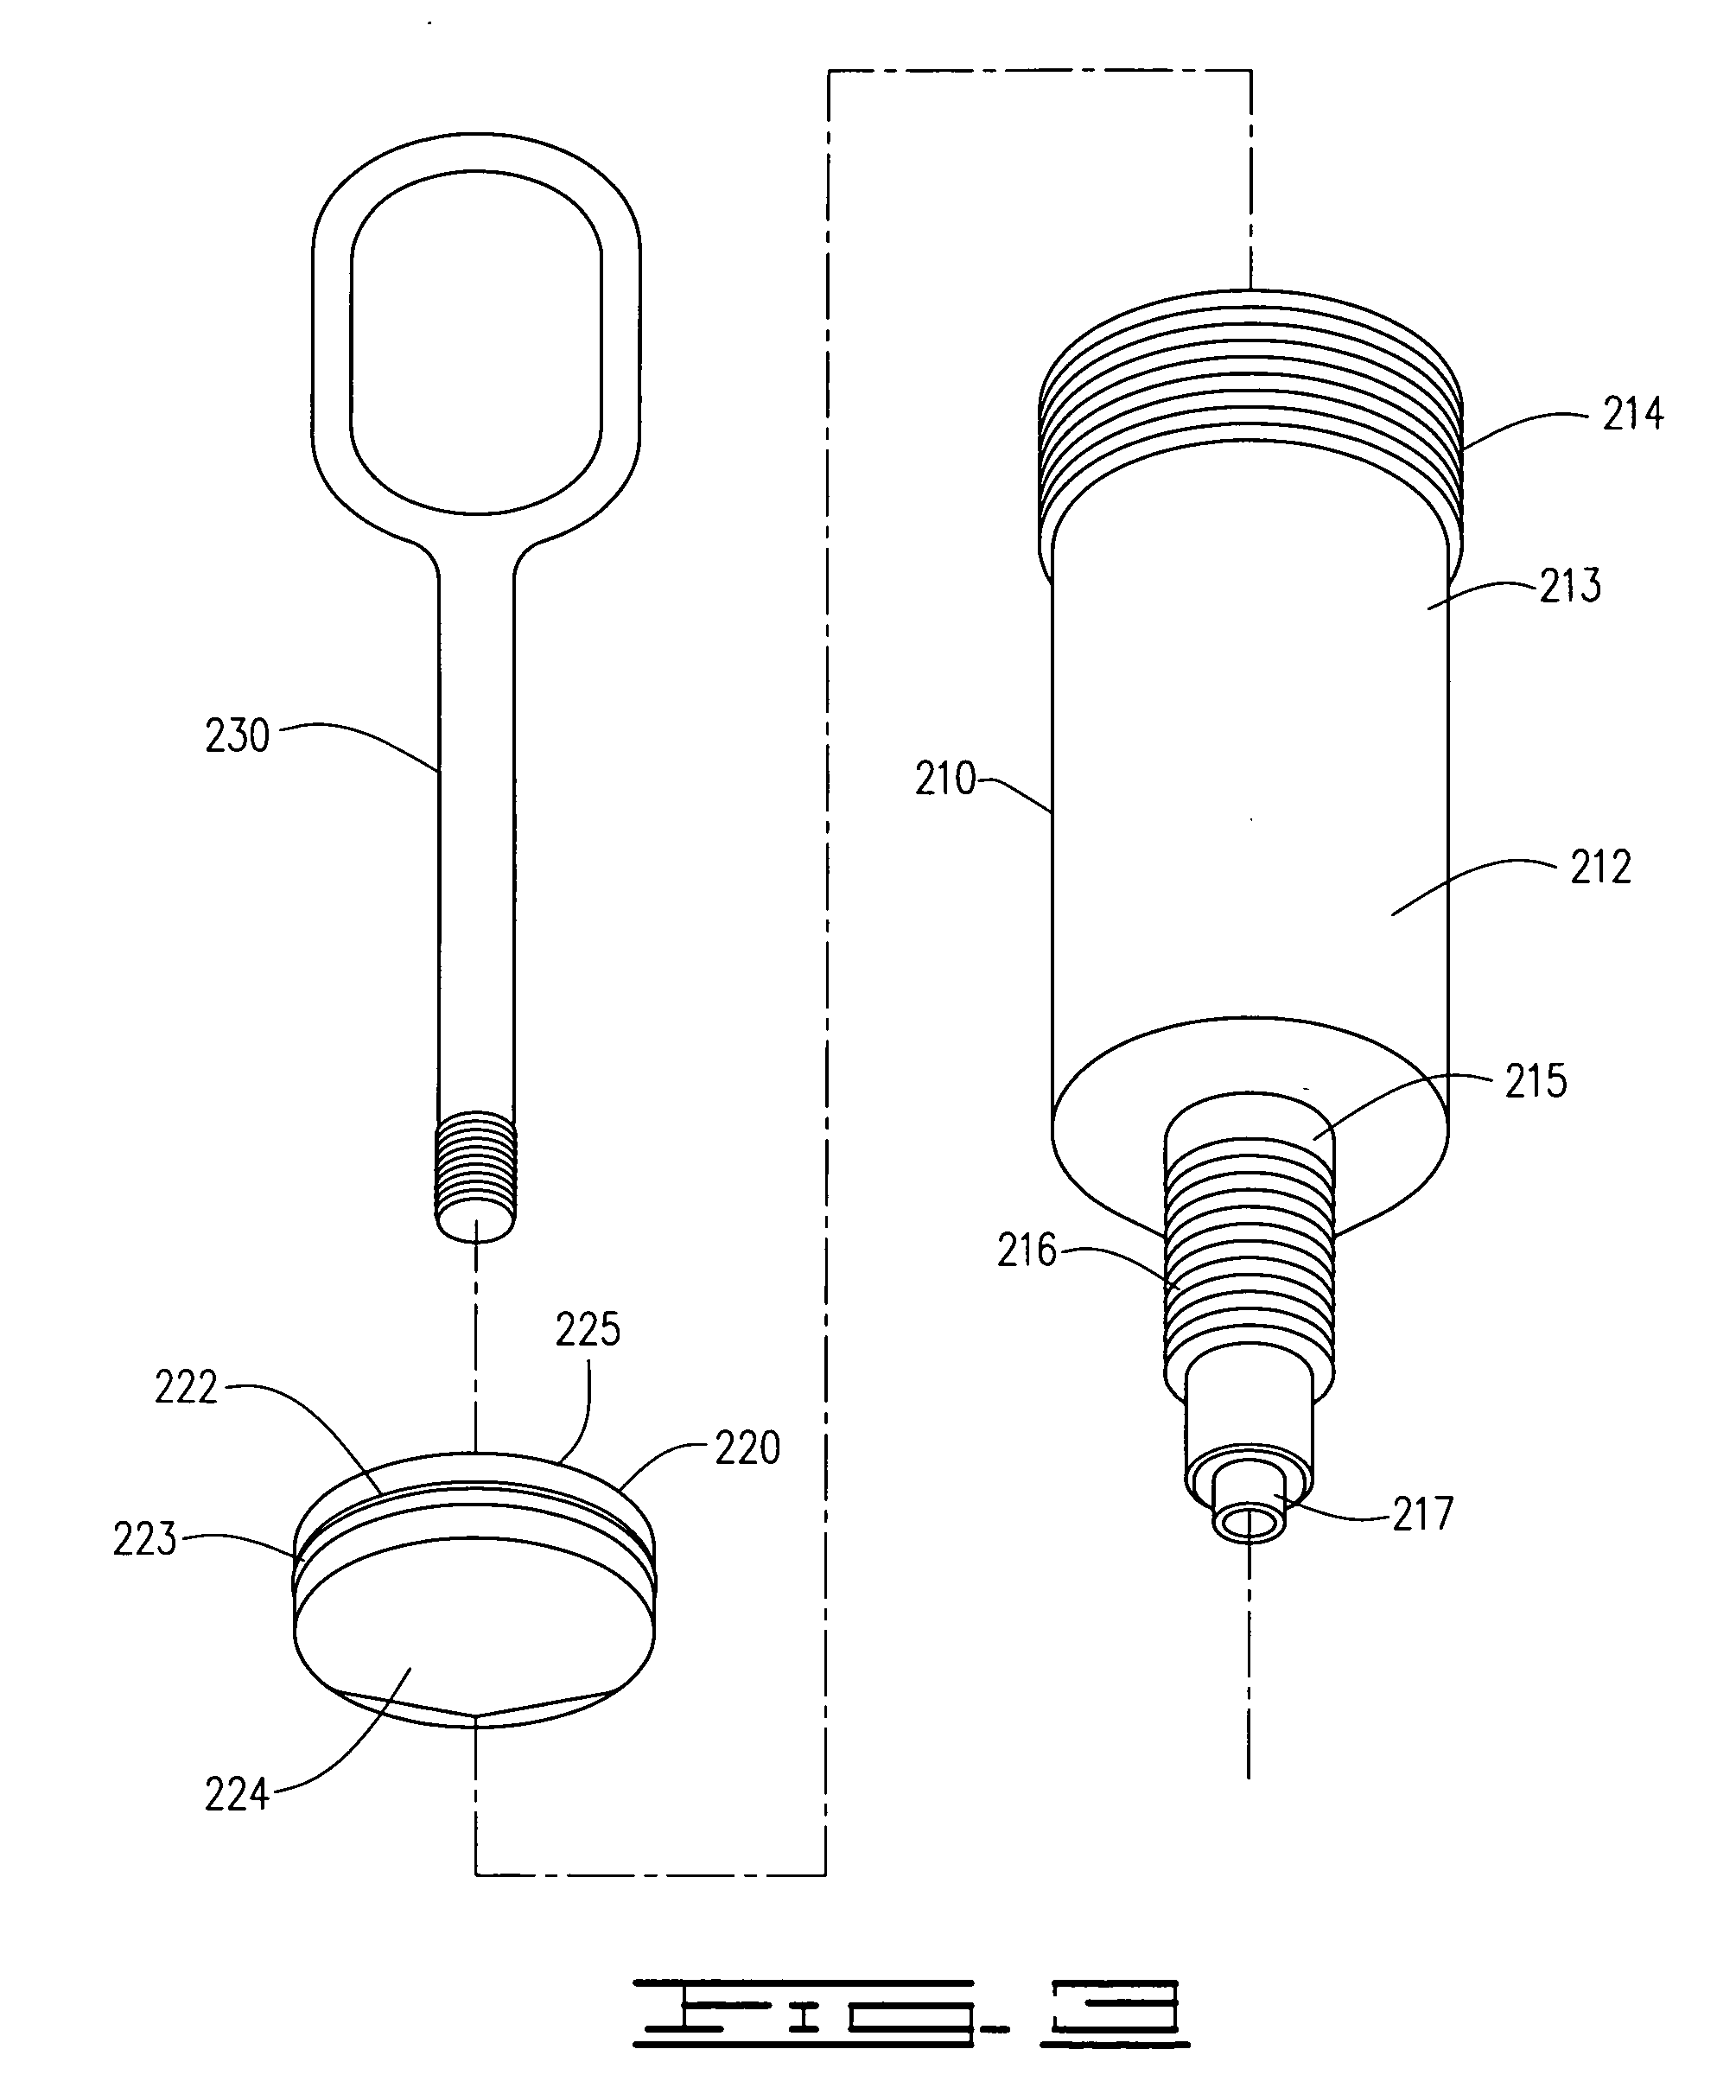 Pressured syringe for the injection of a viscous liquid through a cannulated surgical screw bone filler adapter